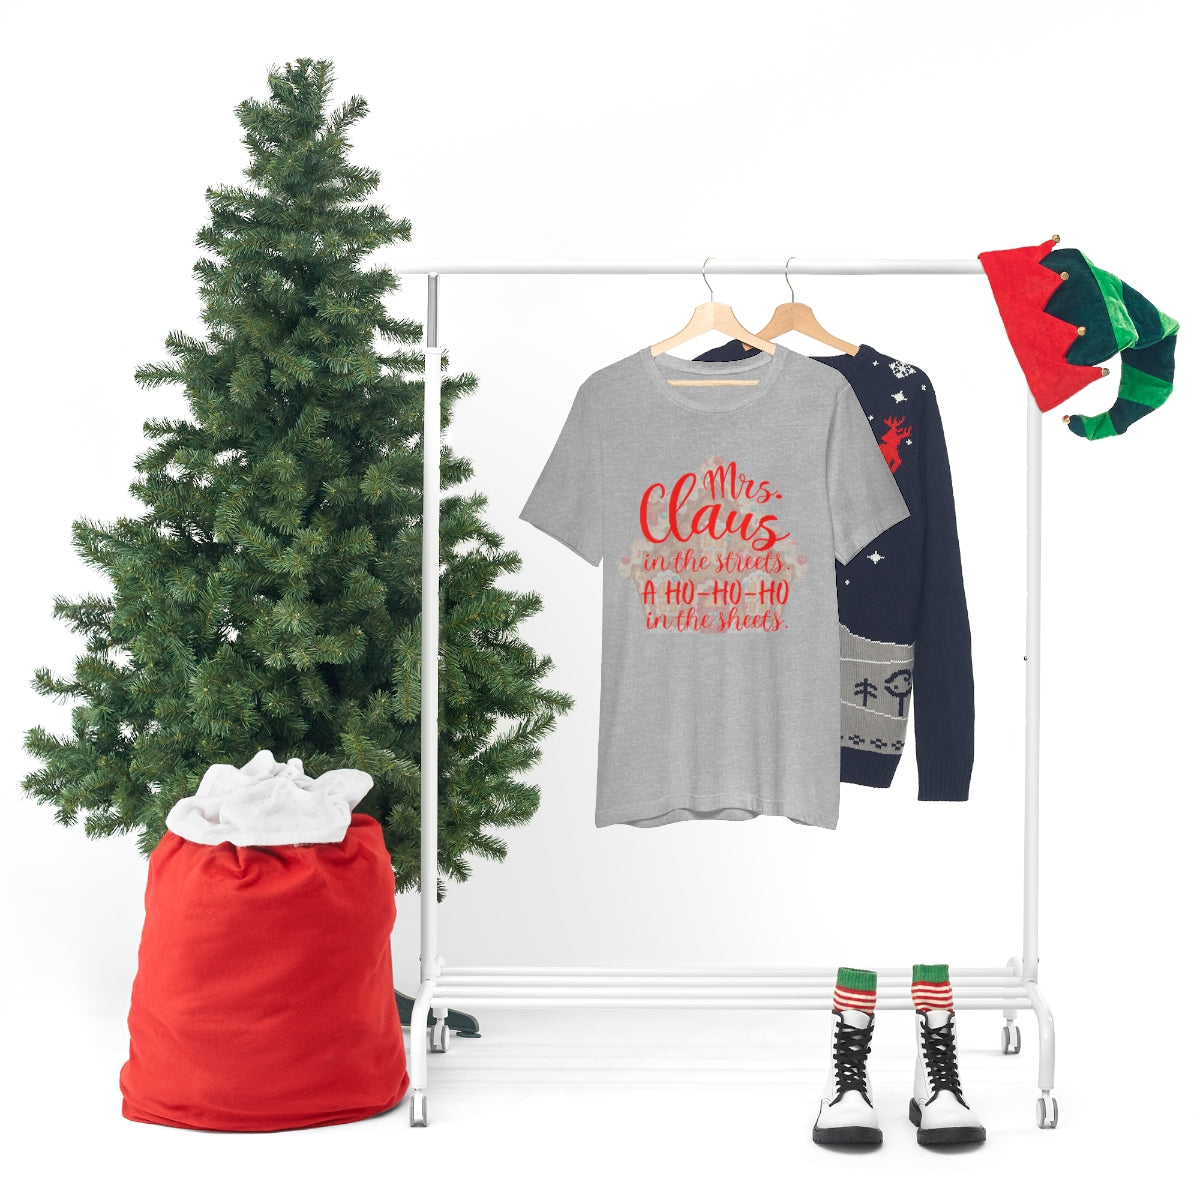 Mrs. Claus in the streets Ho Ho Ho in the sheets Unisex Jersey Short Sleeve Tee